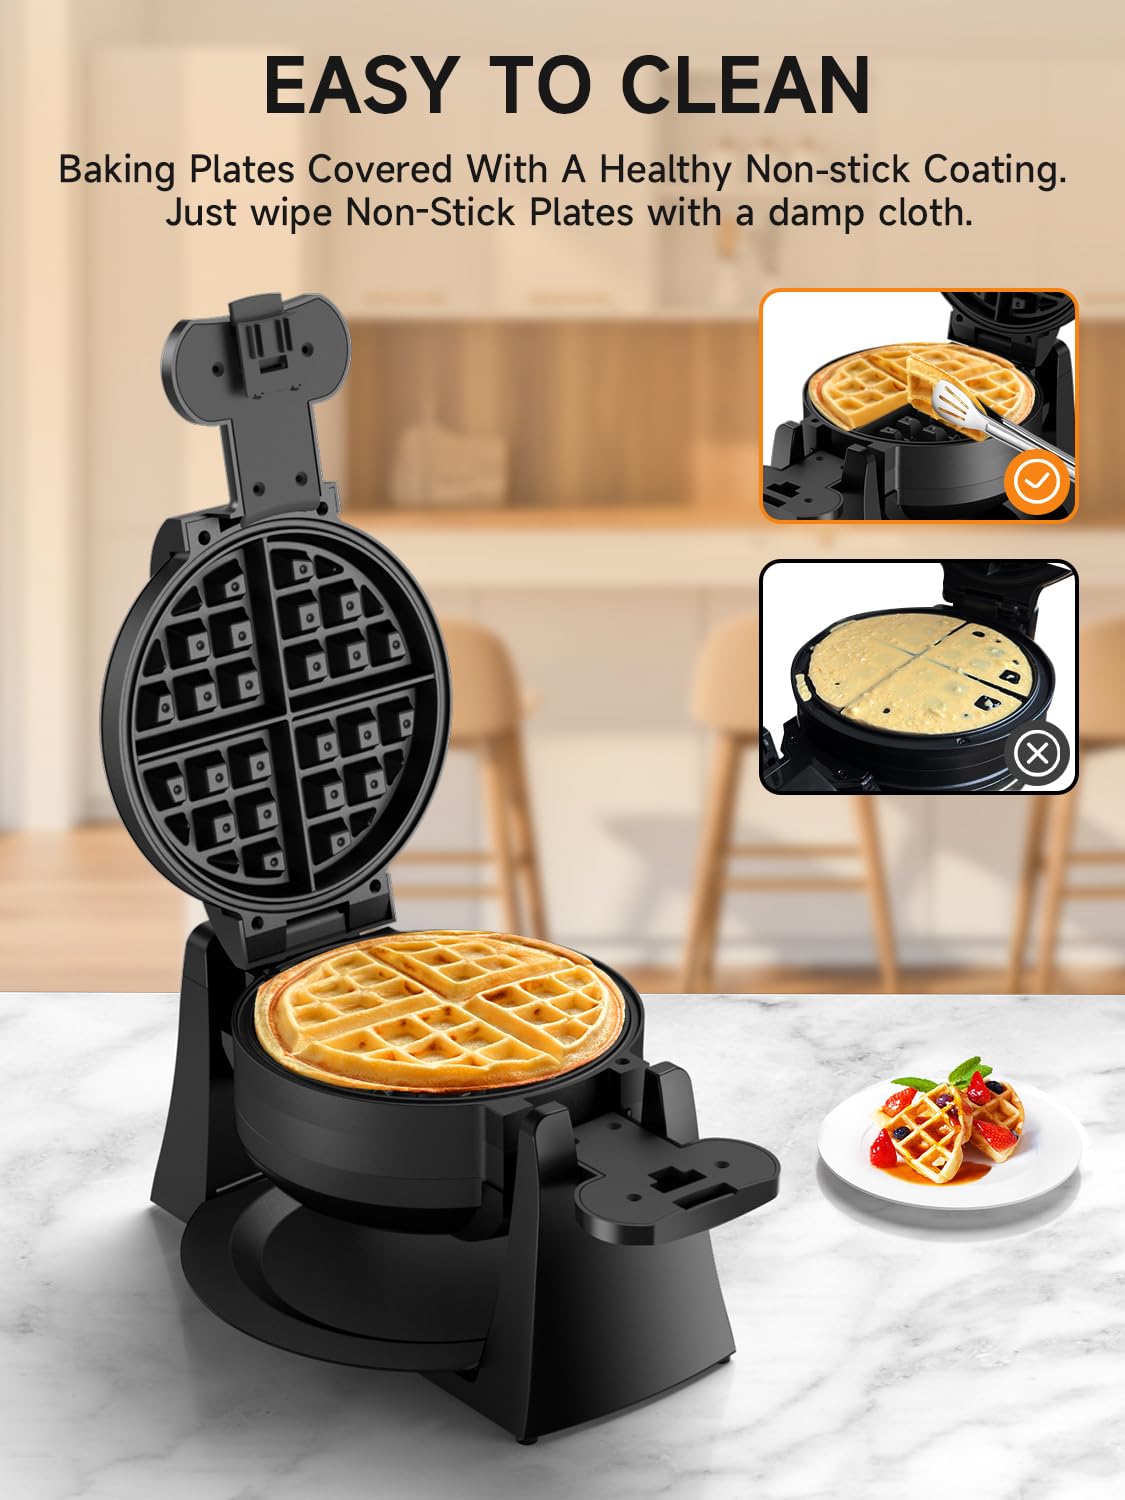 Waffle Maker, 1400W Double Belgian Waffle Iron 180° Flip, 8 Slices, Rotating & Nonstick Plates, Removable Drip Tray for Easy Cleaning, Cool Touch Handles, Space Saving Storage, Black